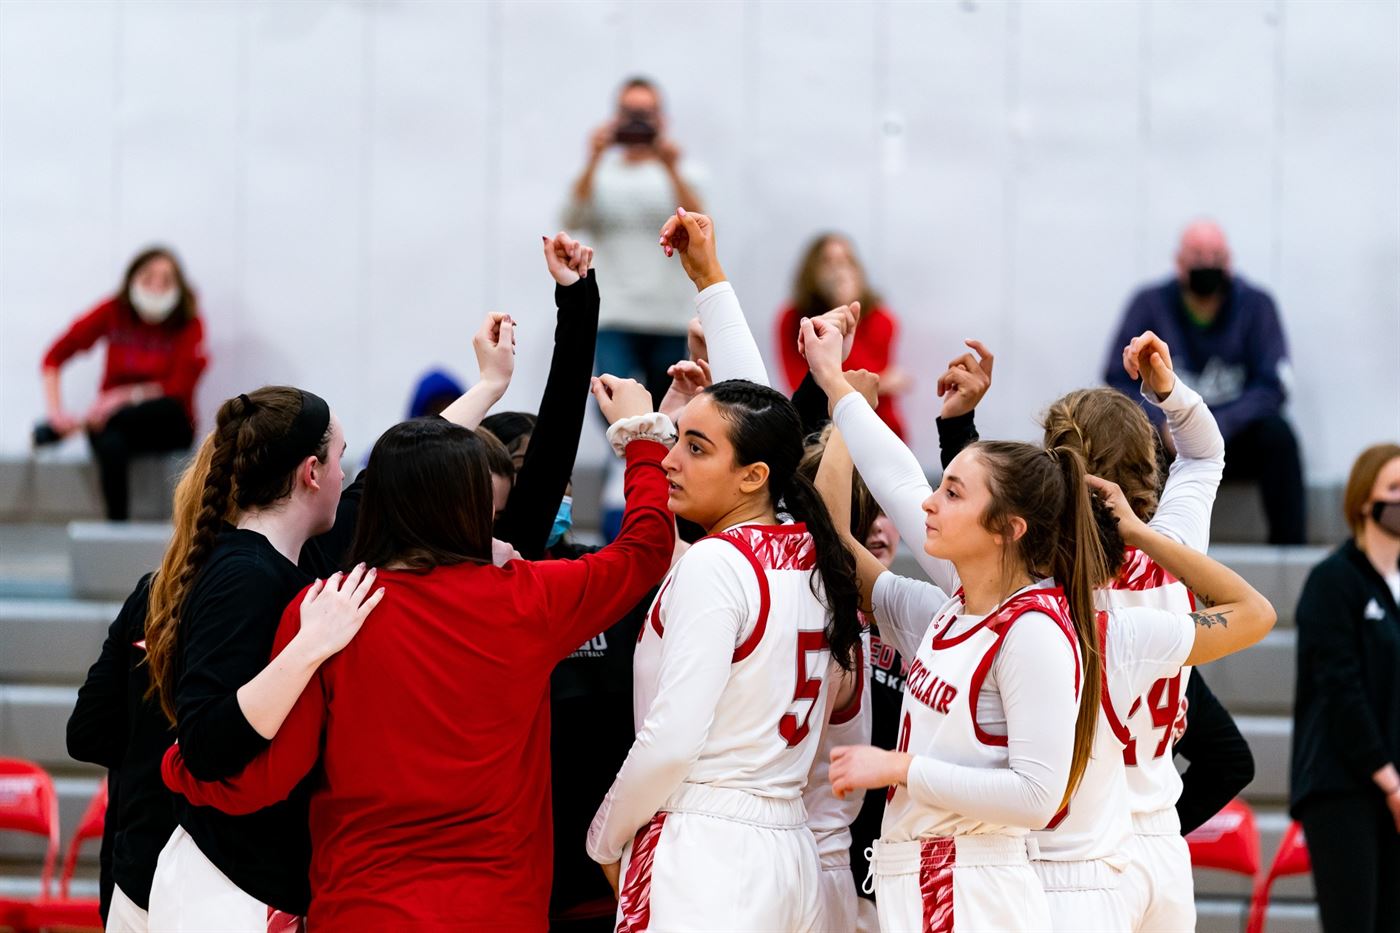 The Montclair State women's basketball team huddling up before going back into the game Chris Krusberg | The Montclarion